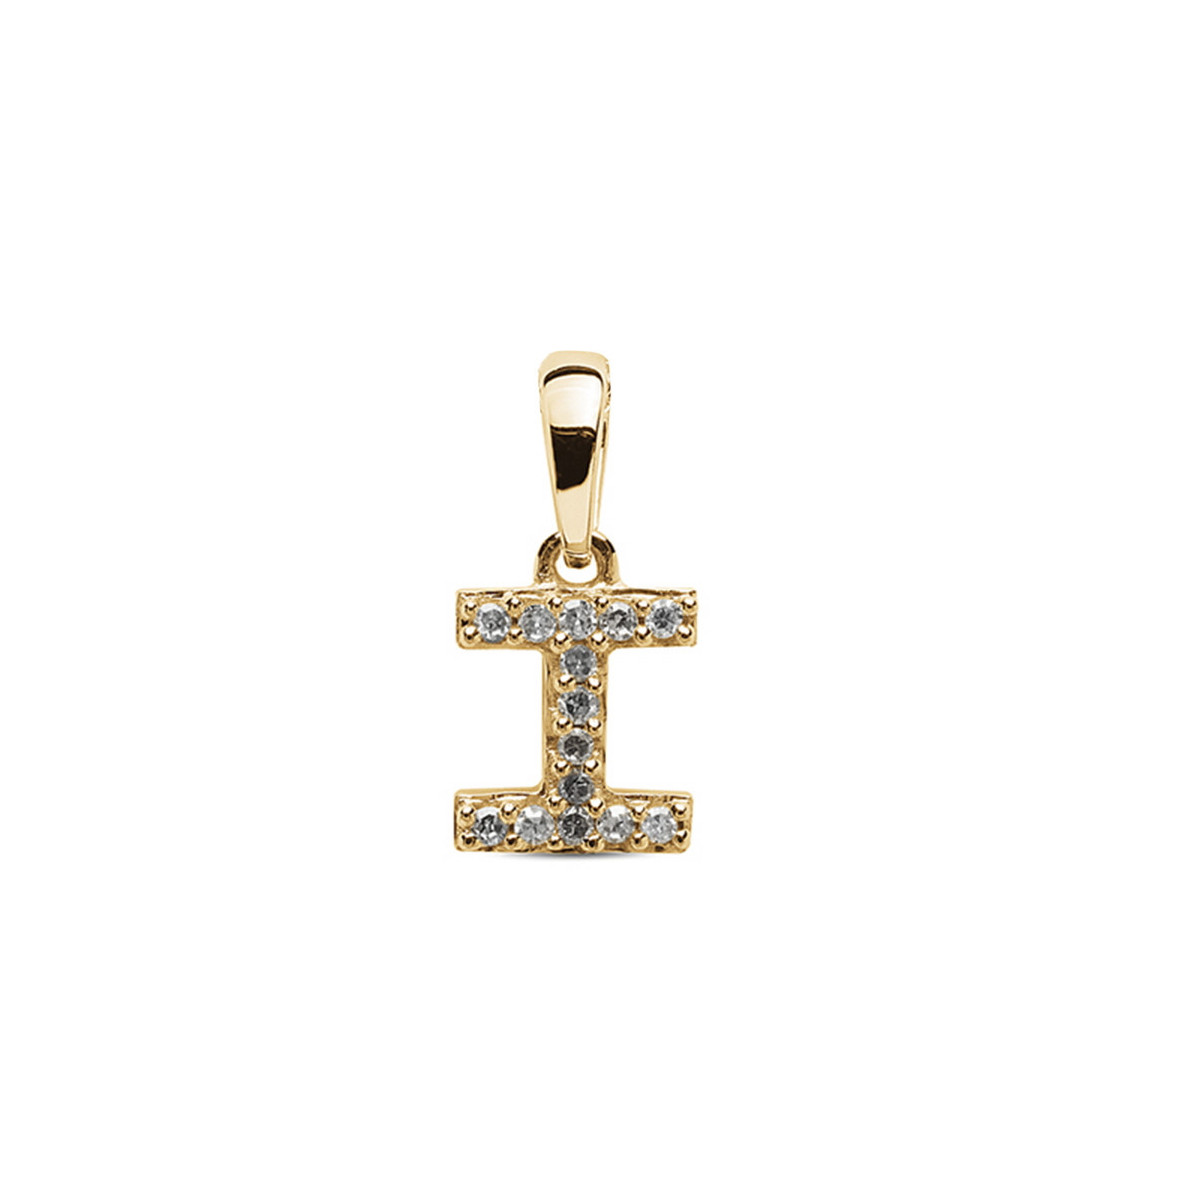 INITIAL PENDANT I YELLOW GOLD WITH DIAMONDS